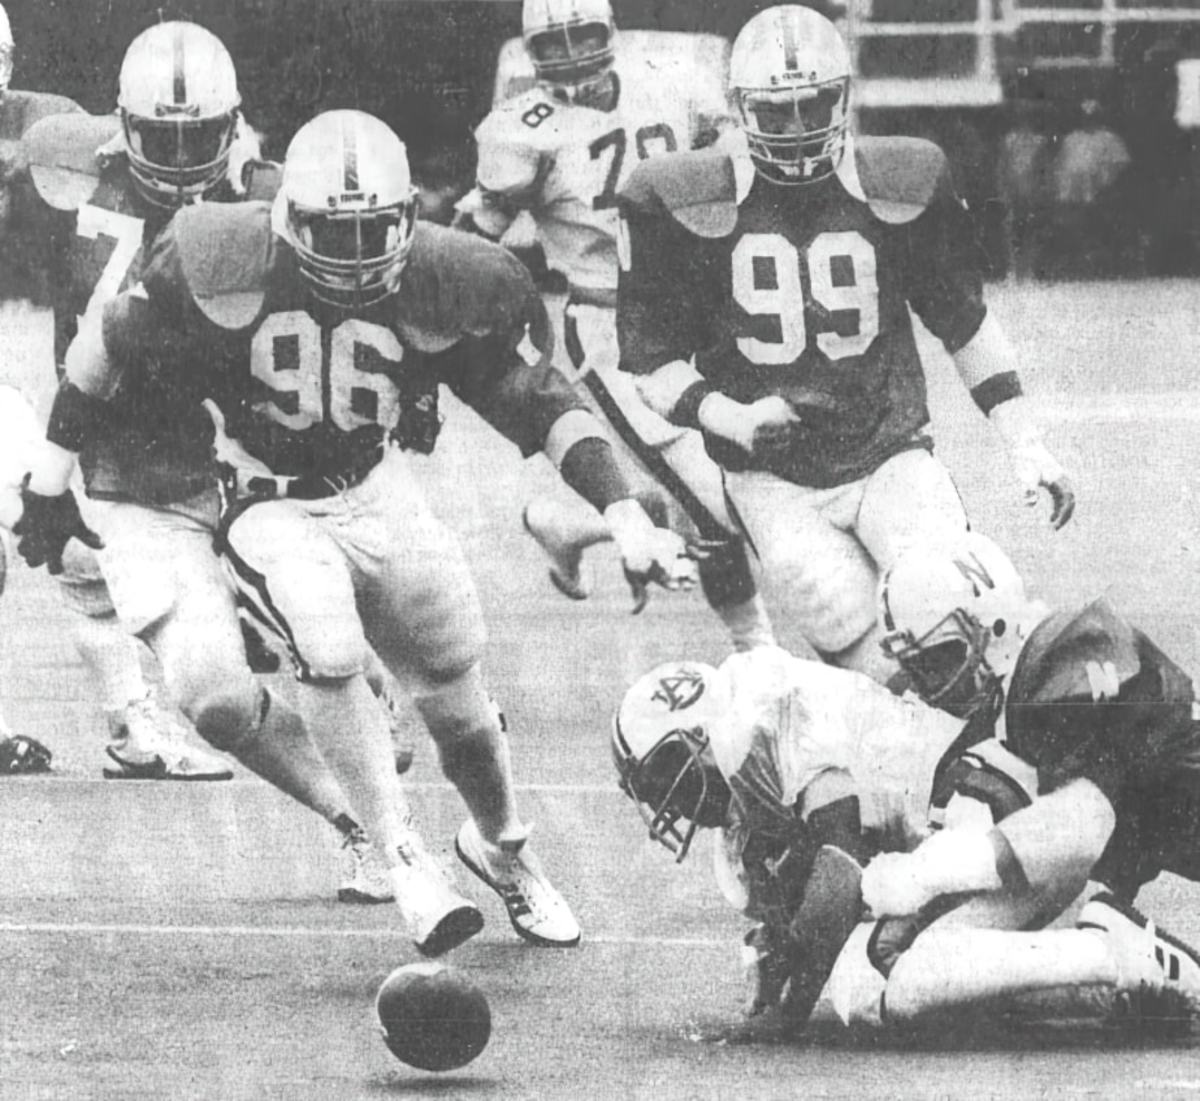 Jimmy Williams (96) gets ready to pounce on the Auburn fumble that set up Nebraska’s first touchdown.